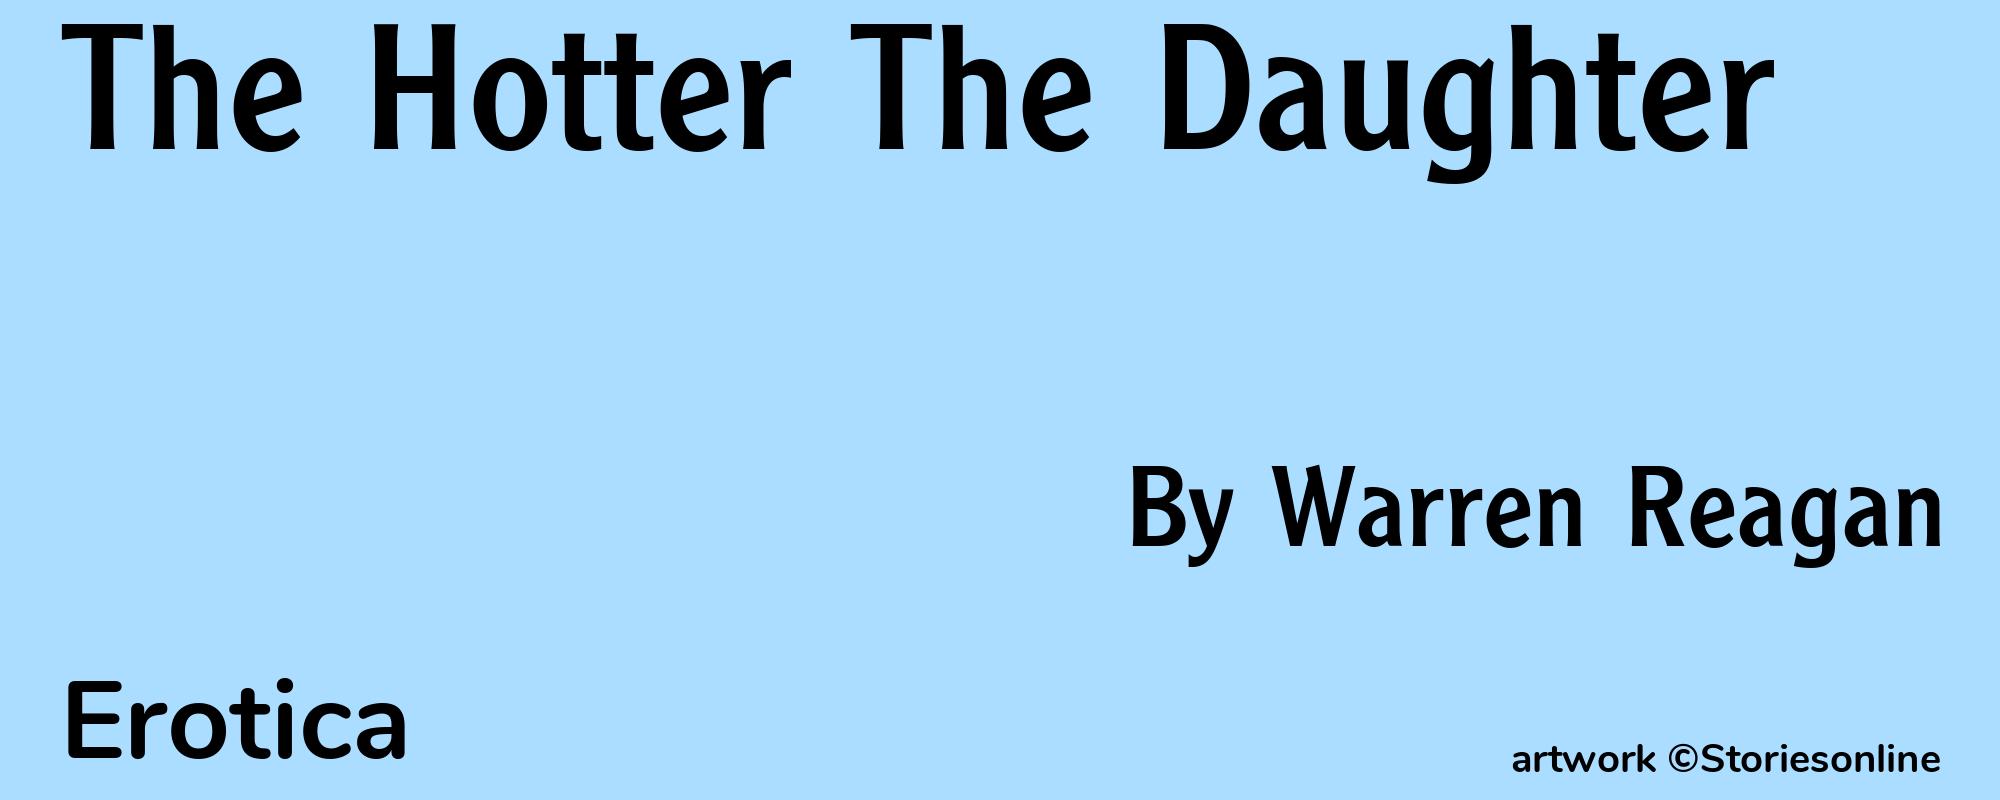 The Hotter The Daughter - Cover